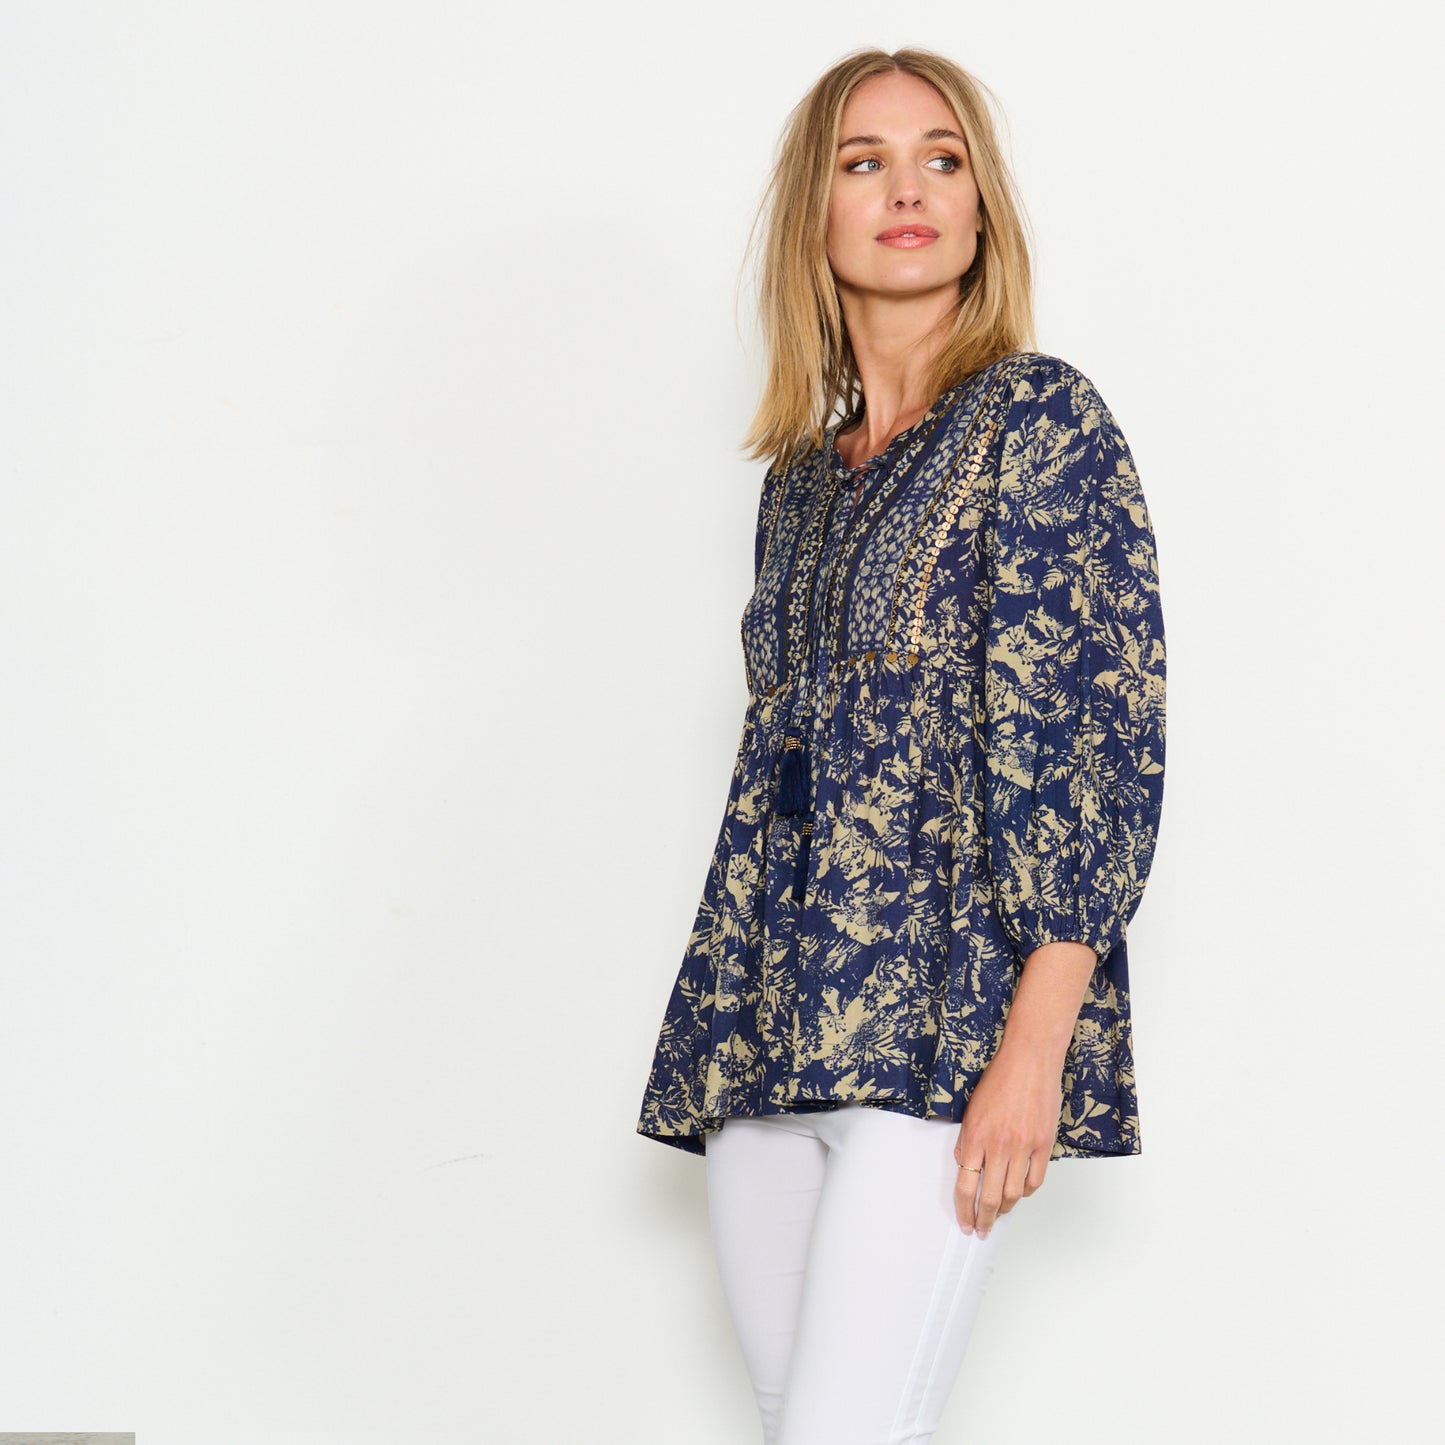 Placement Beads Blouse - Navy Print